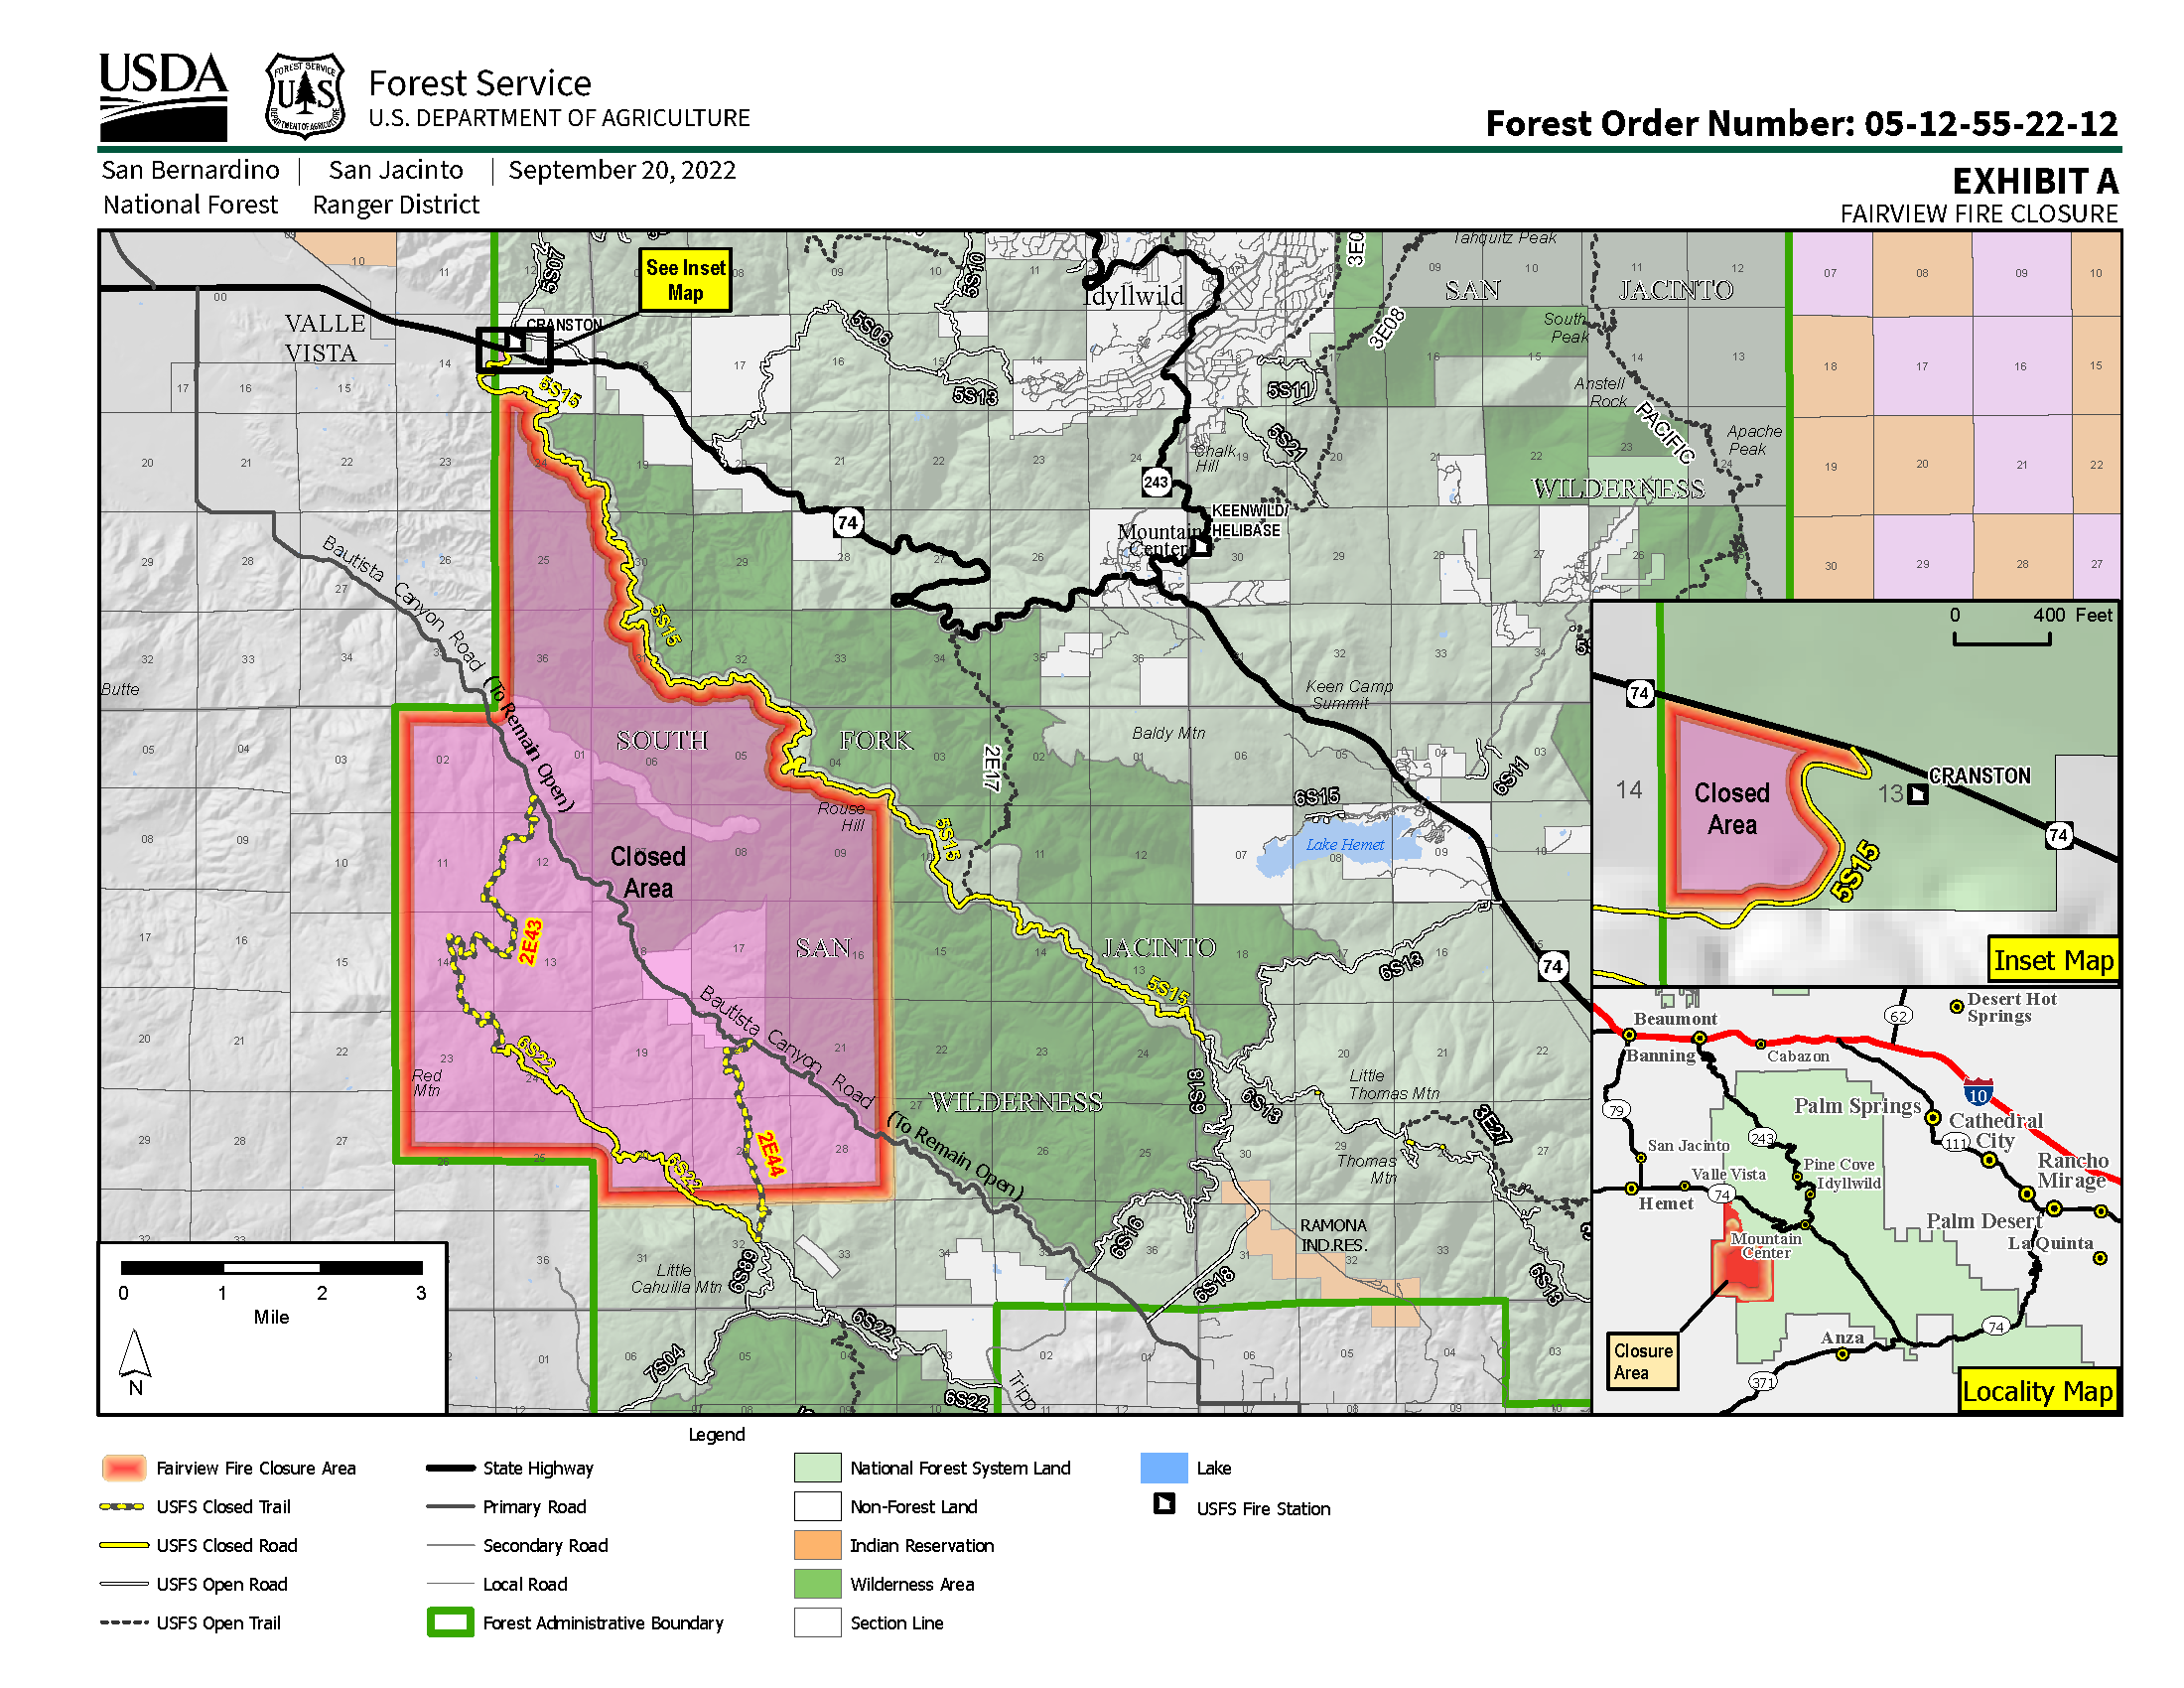 Fairview Fire Closure Map Forest Order # 05-12-55-22-12 Exhibit A